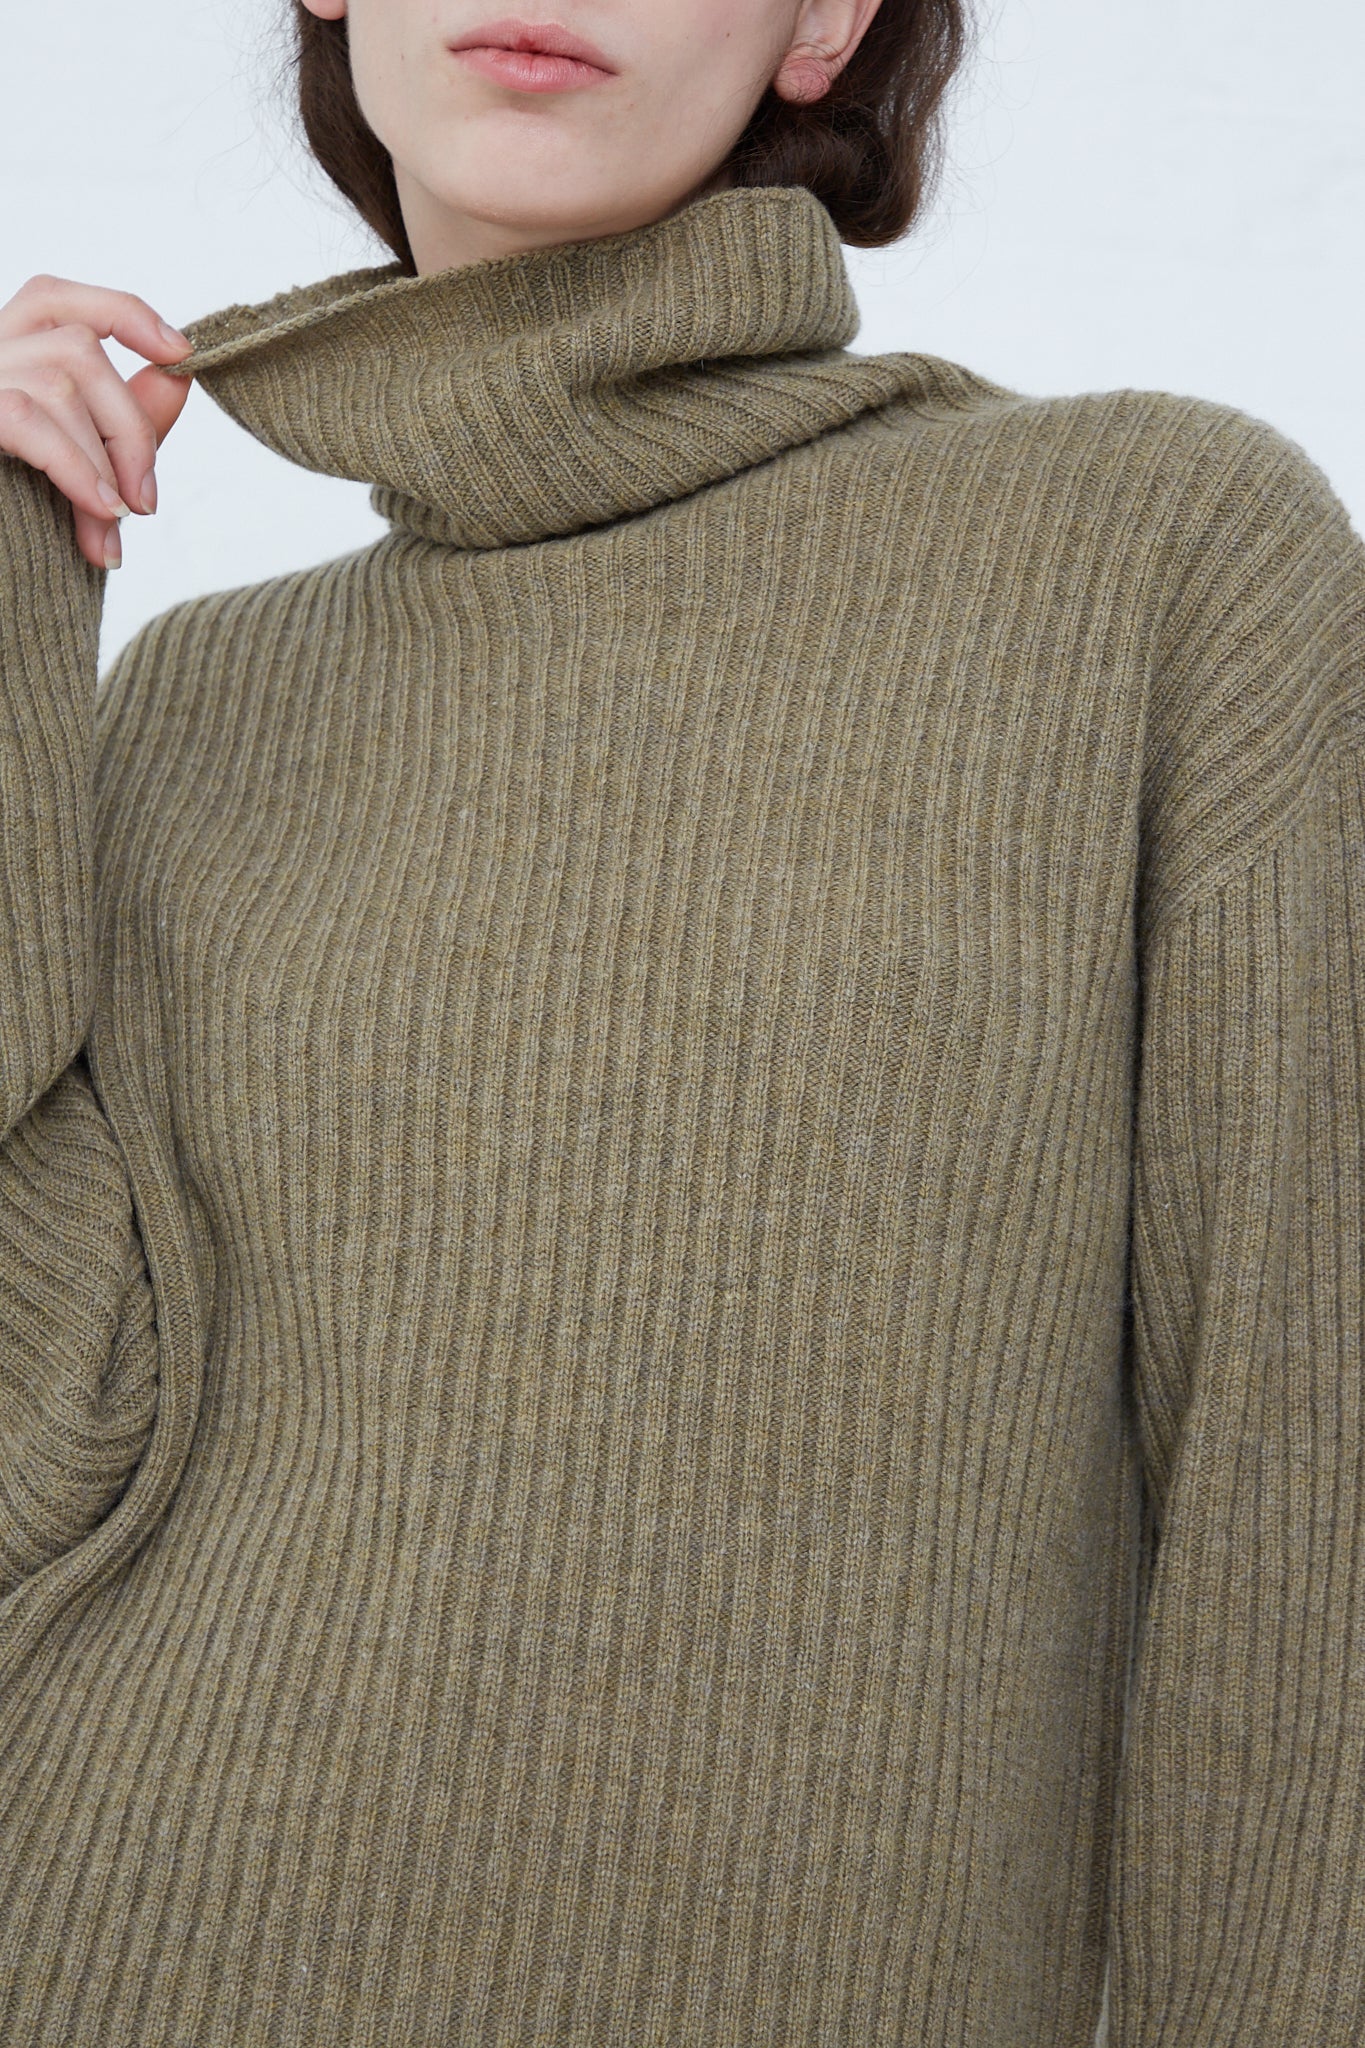 The model is wearing a relaxed fit, Ichi Antiquités Wool Rib Knit Turtleneck in Mocha sweater.